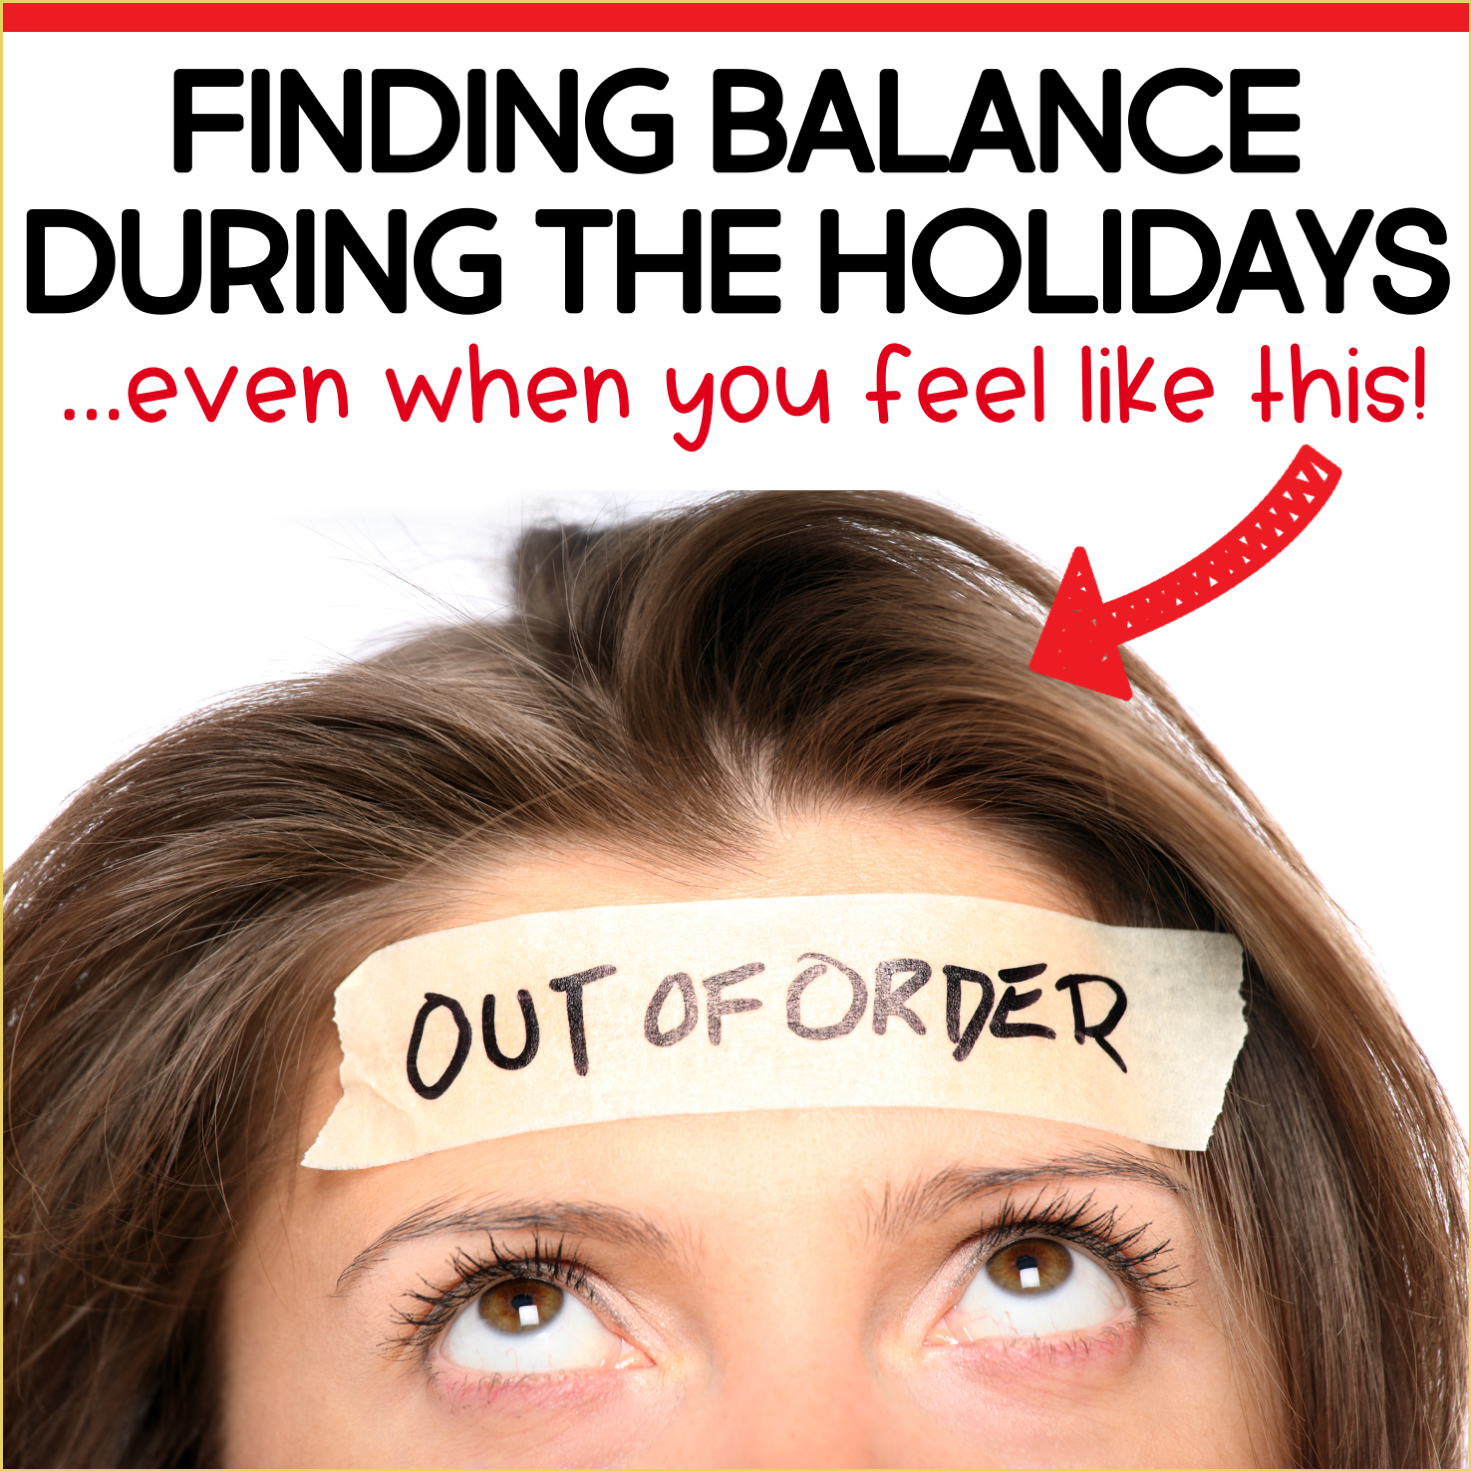 Finding Work Life Balance as a Teacher During the Holidays